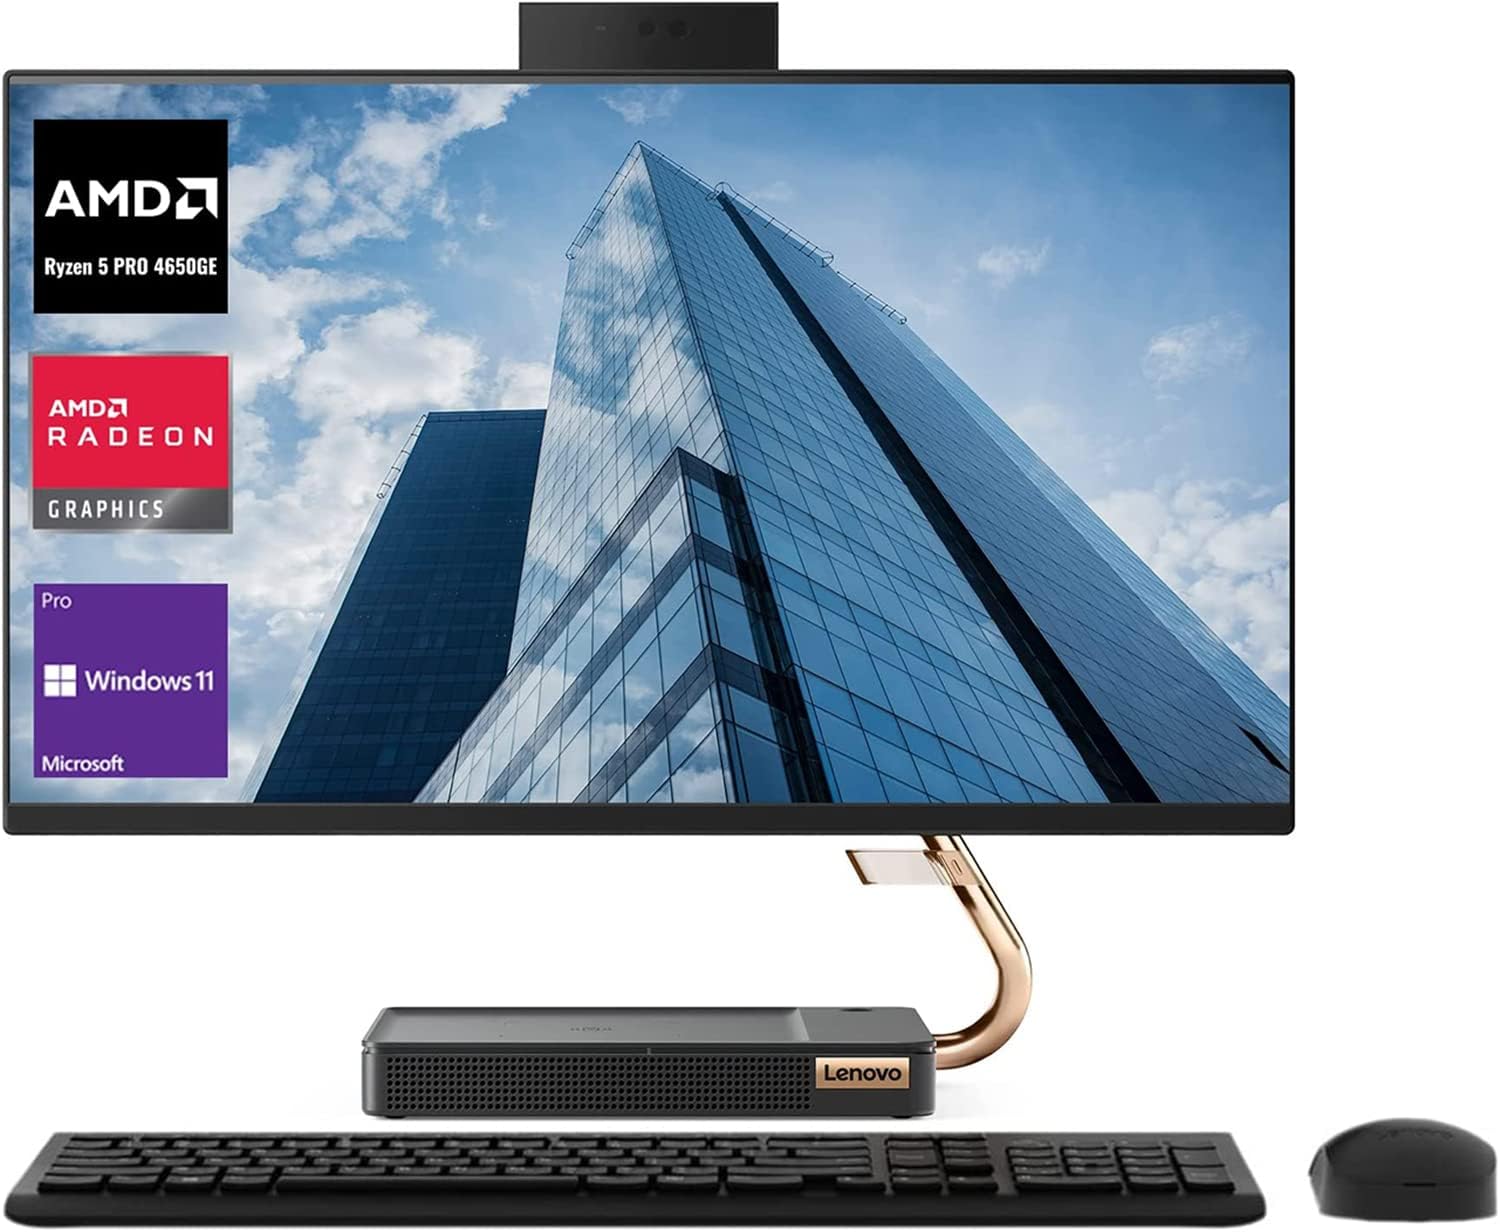 Lenovo Ideacentre A540 Business All-in-One Desktop Review